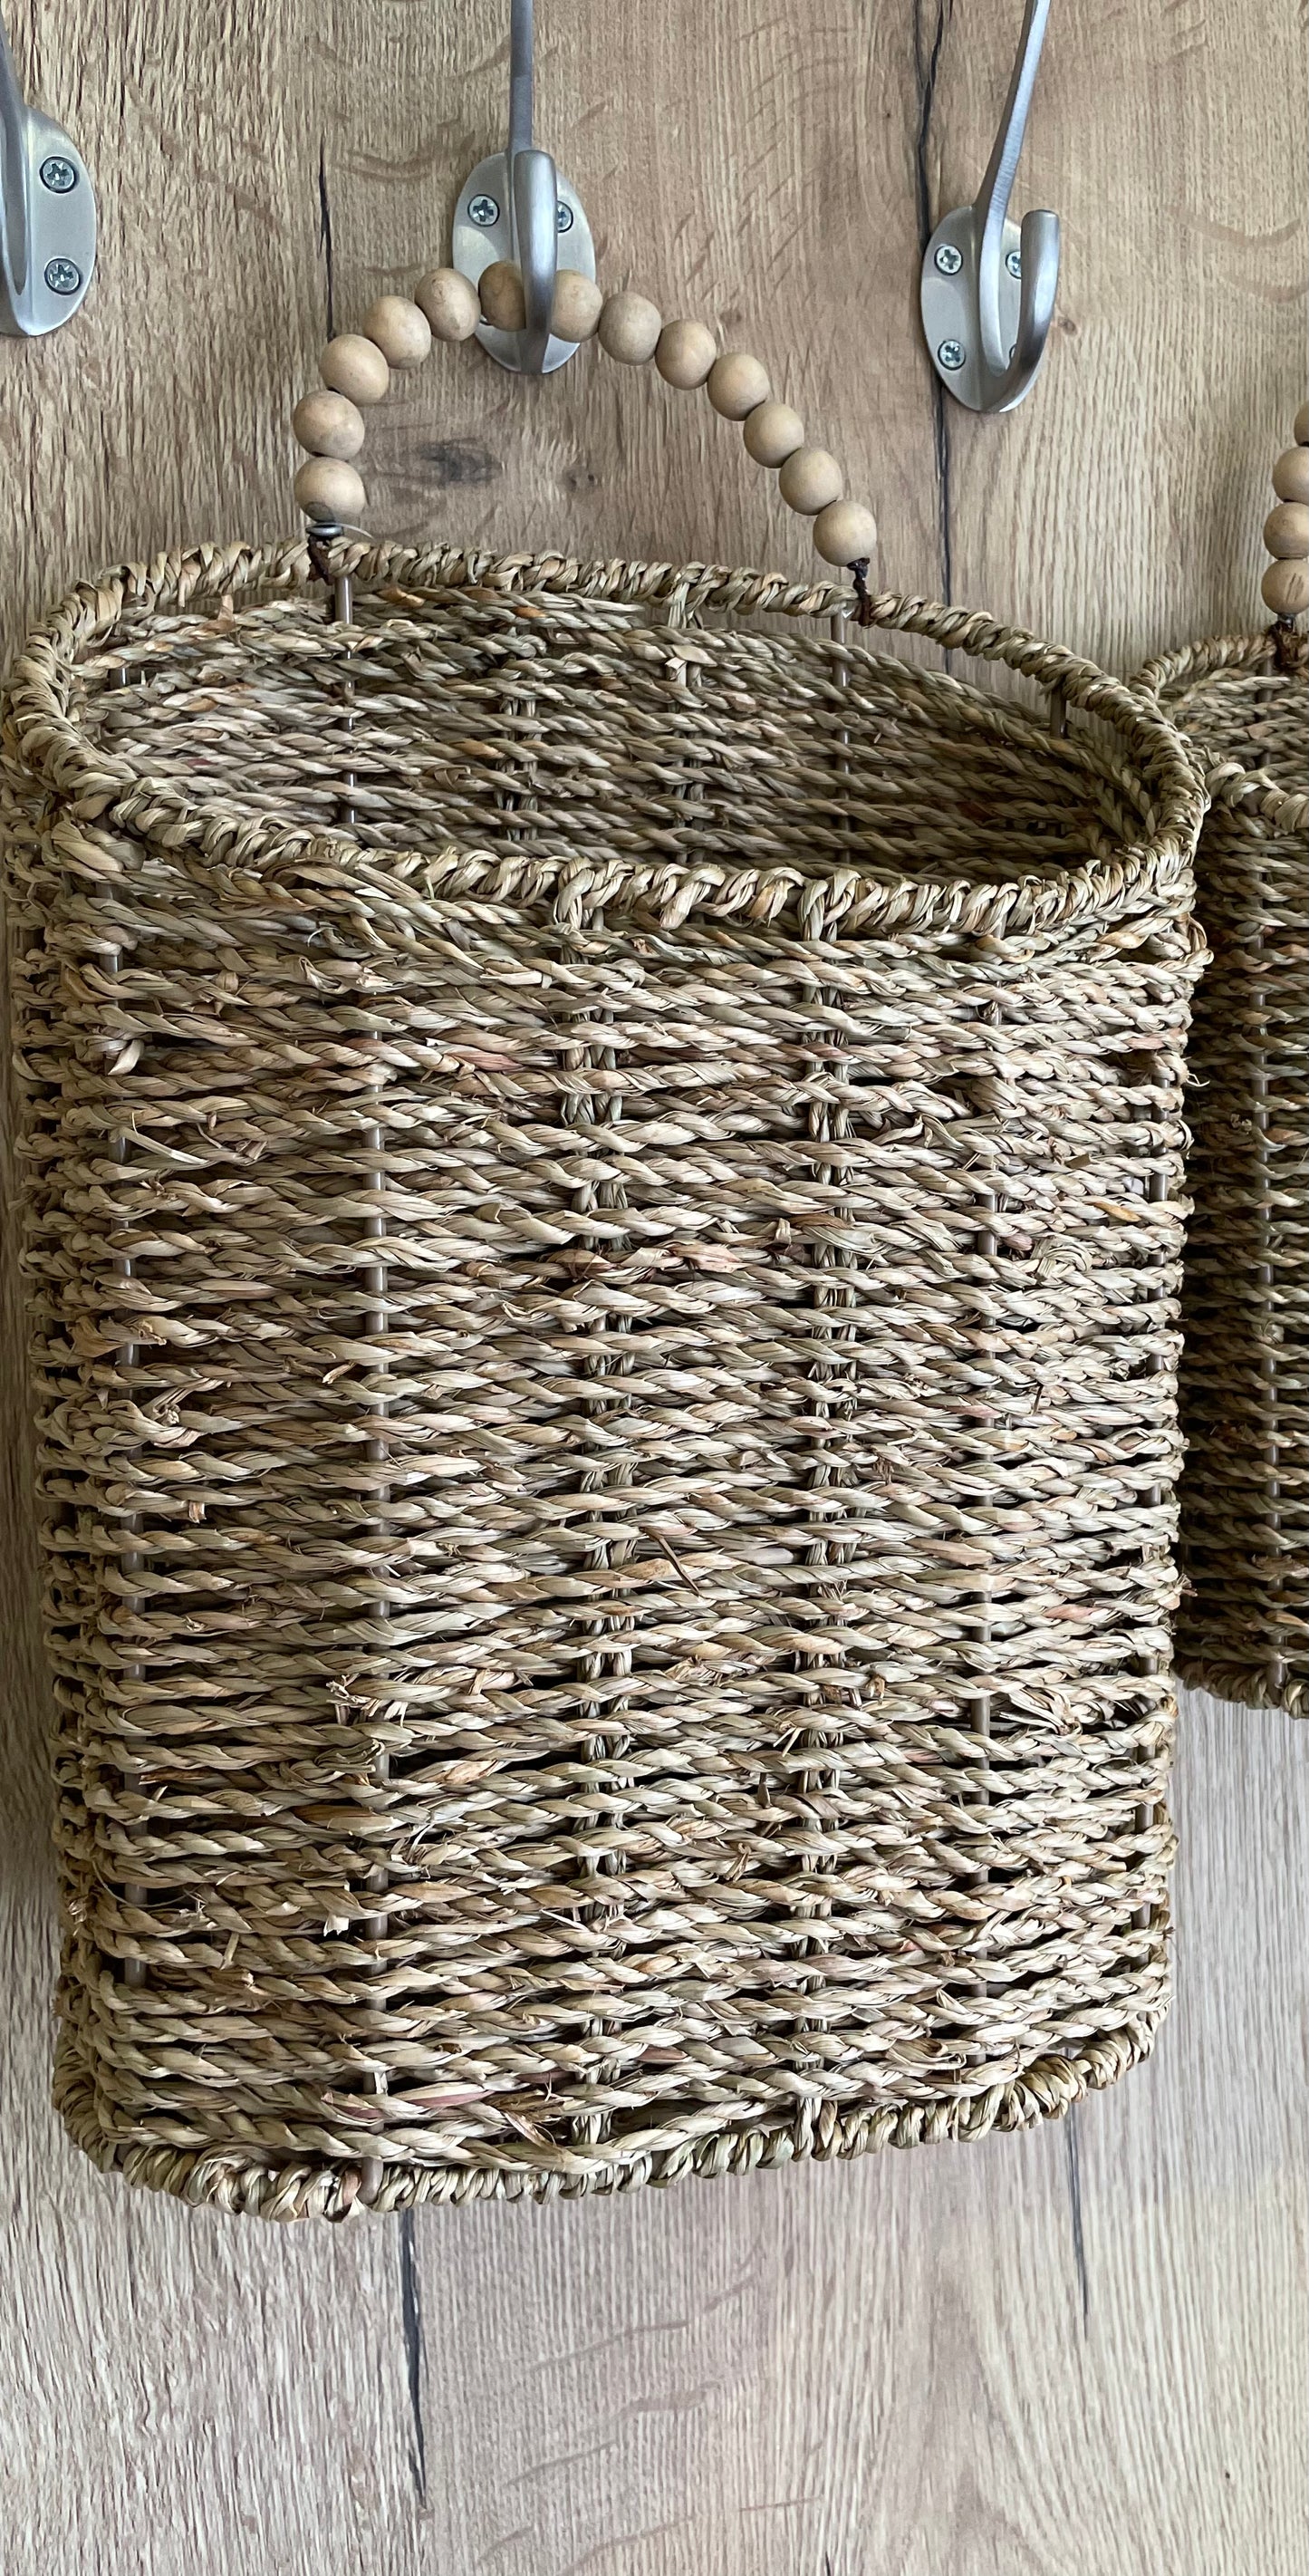 Beaded Handle Seagrass Baskets (Sets Or Singles)